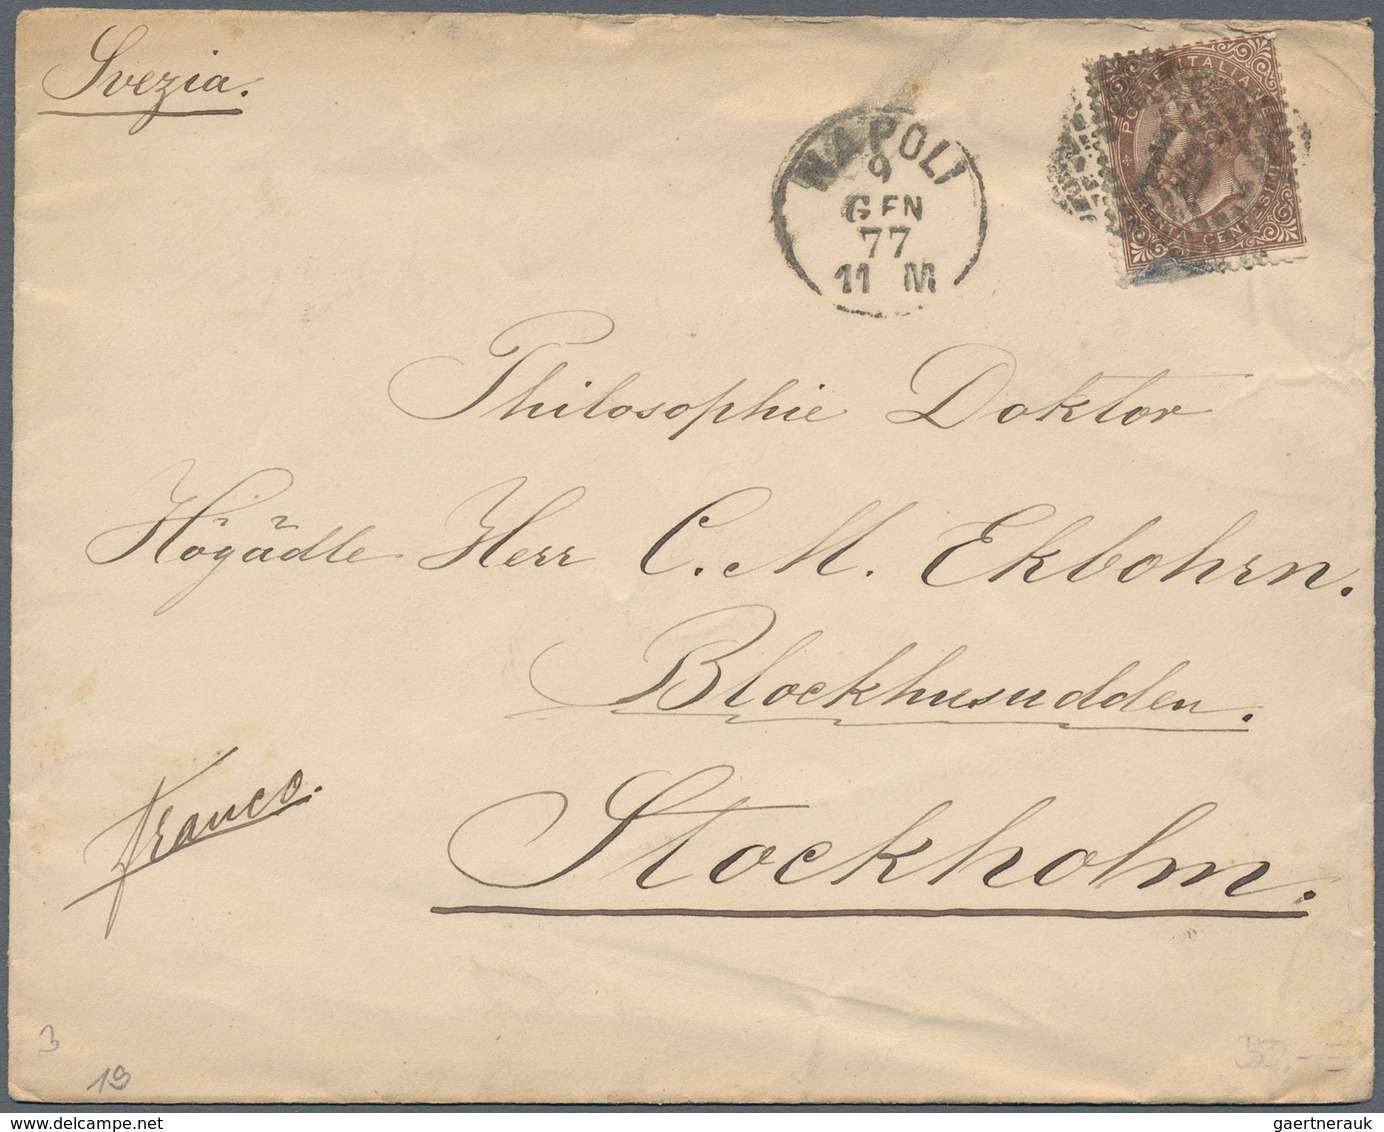 Italien: 1821 - 1971 (ca.), accumulation of 75 covers, besides, among other things, ship's mail Aron